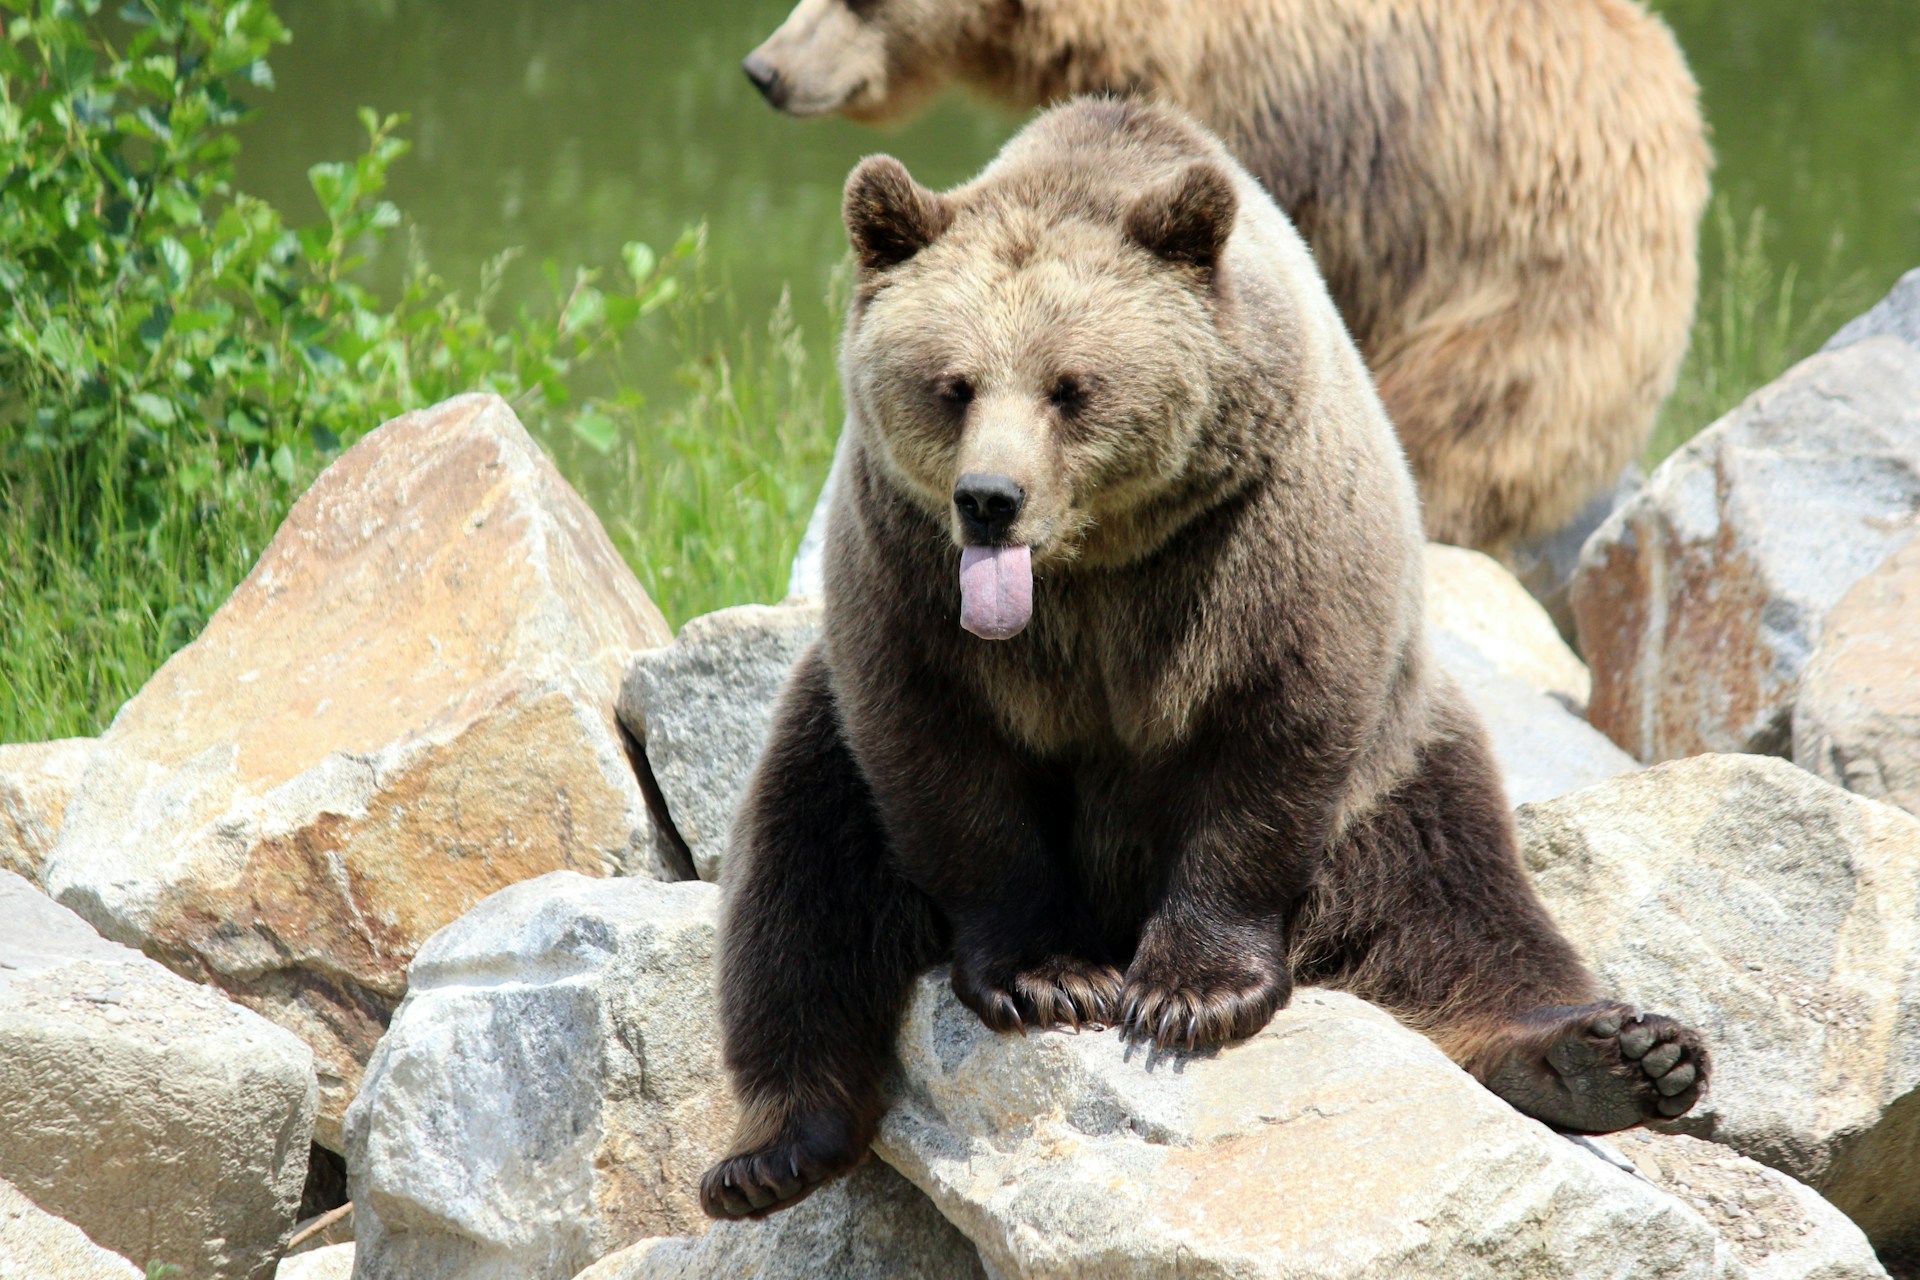 Japan will introduce AI-enabled systems to track bears